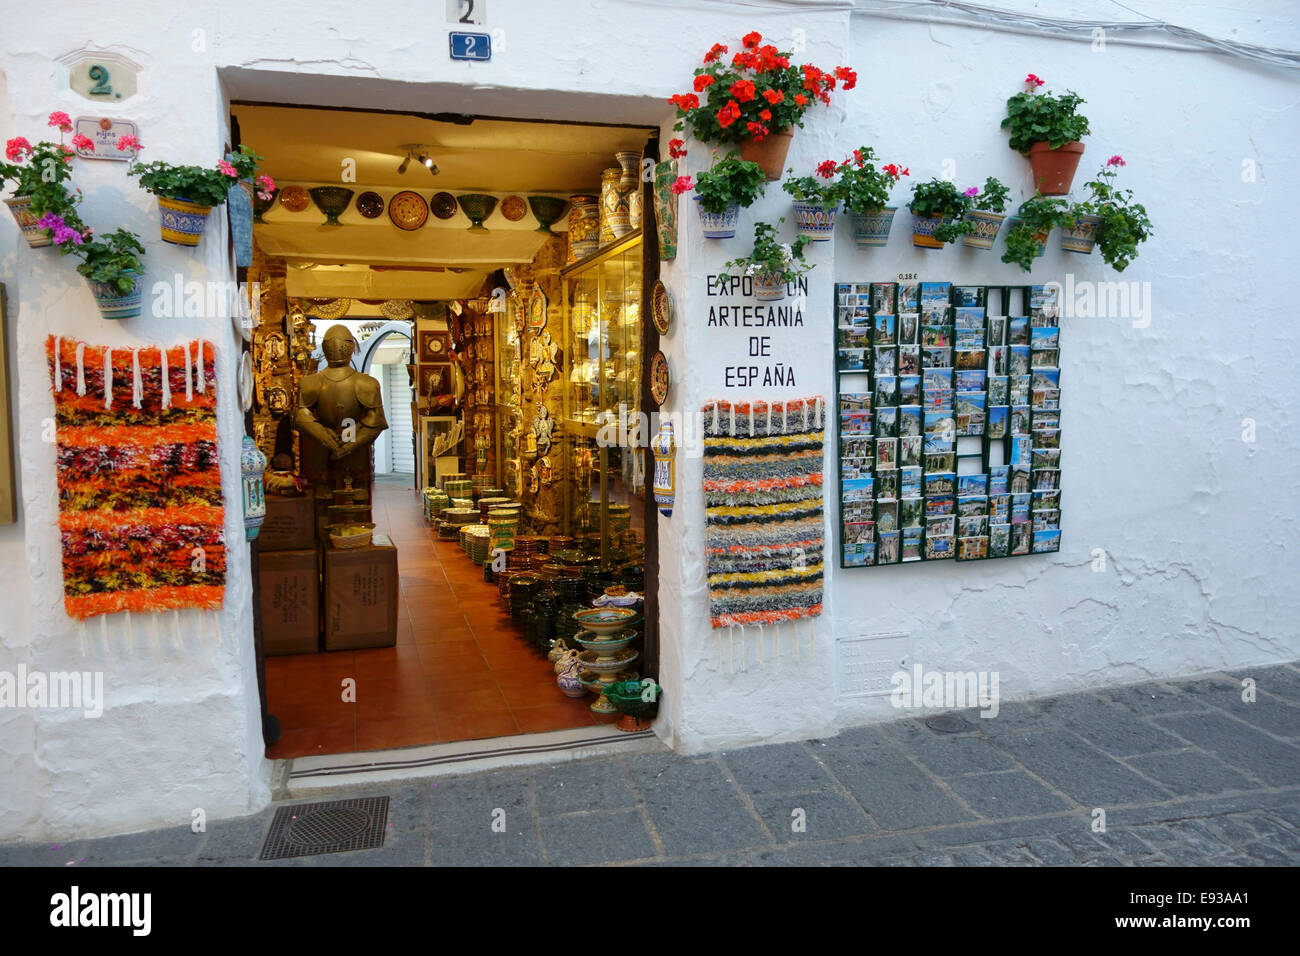 Spanish pottery and ceramic shop in Mijas, Andalusia, Southern Spain. Stock Photo